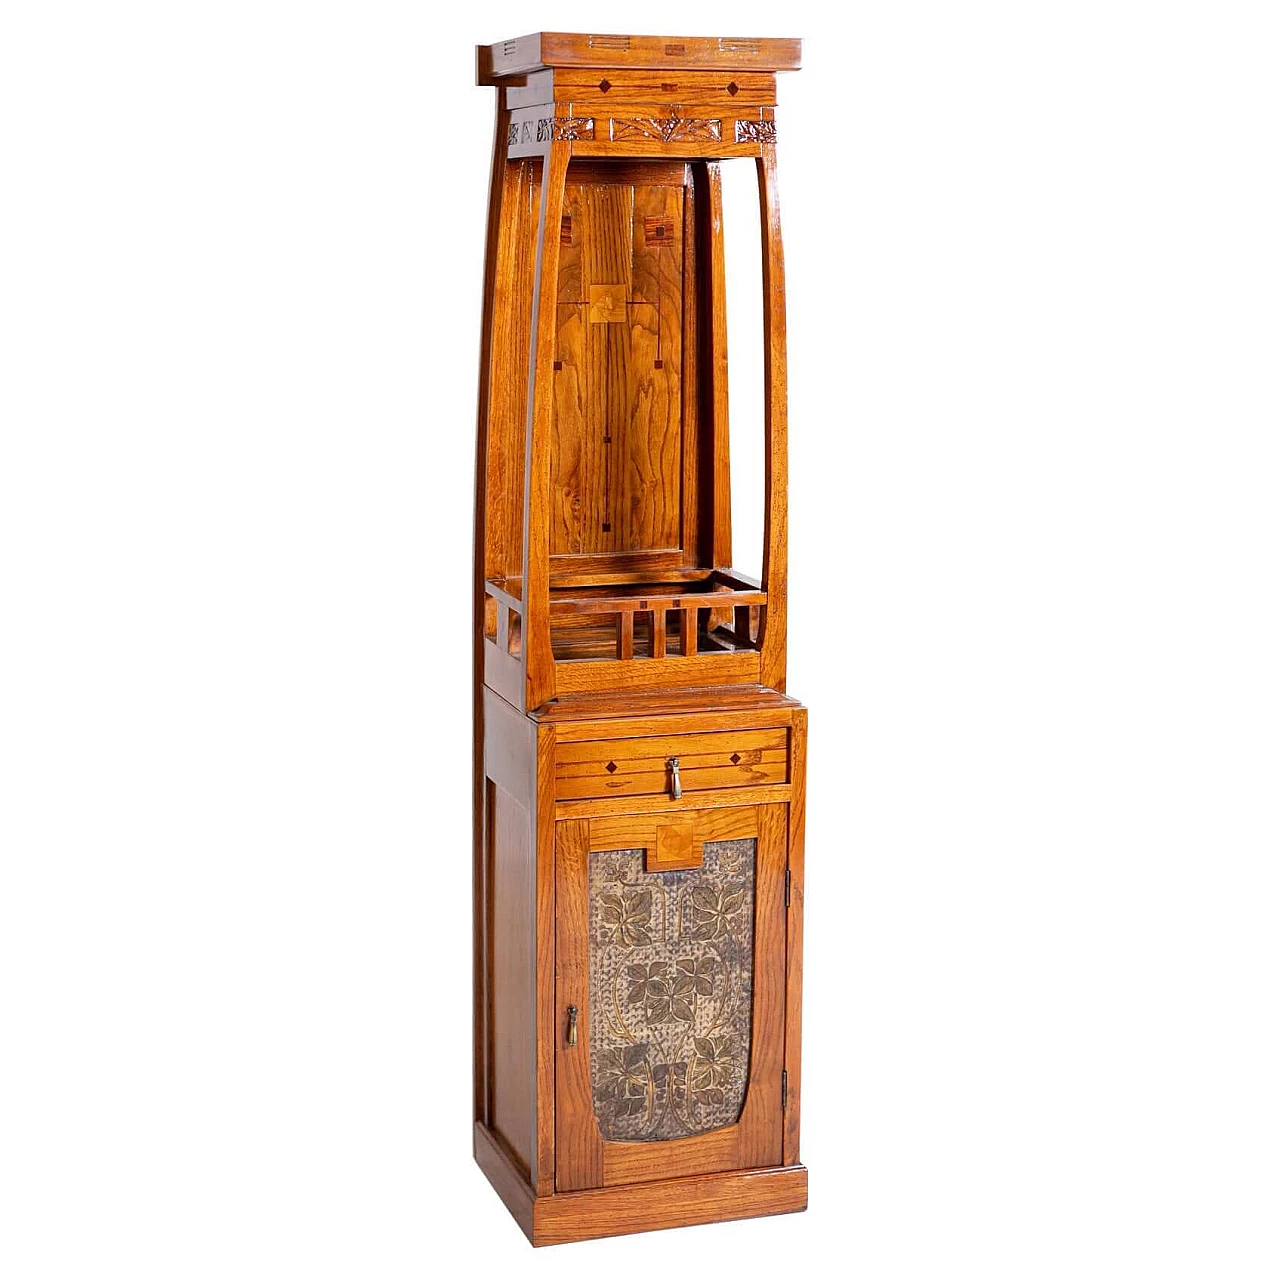 Carved wooden cabinet in Art Nouveau style, 20th century 1403422